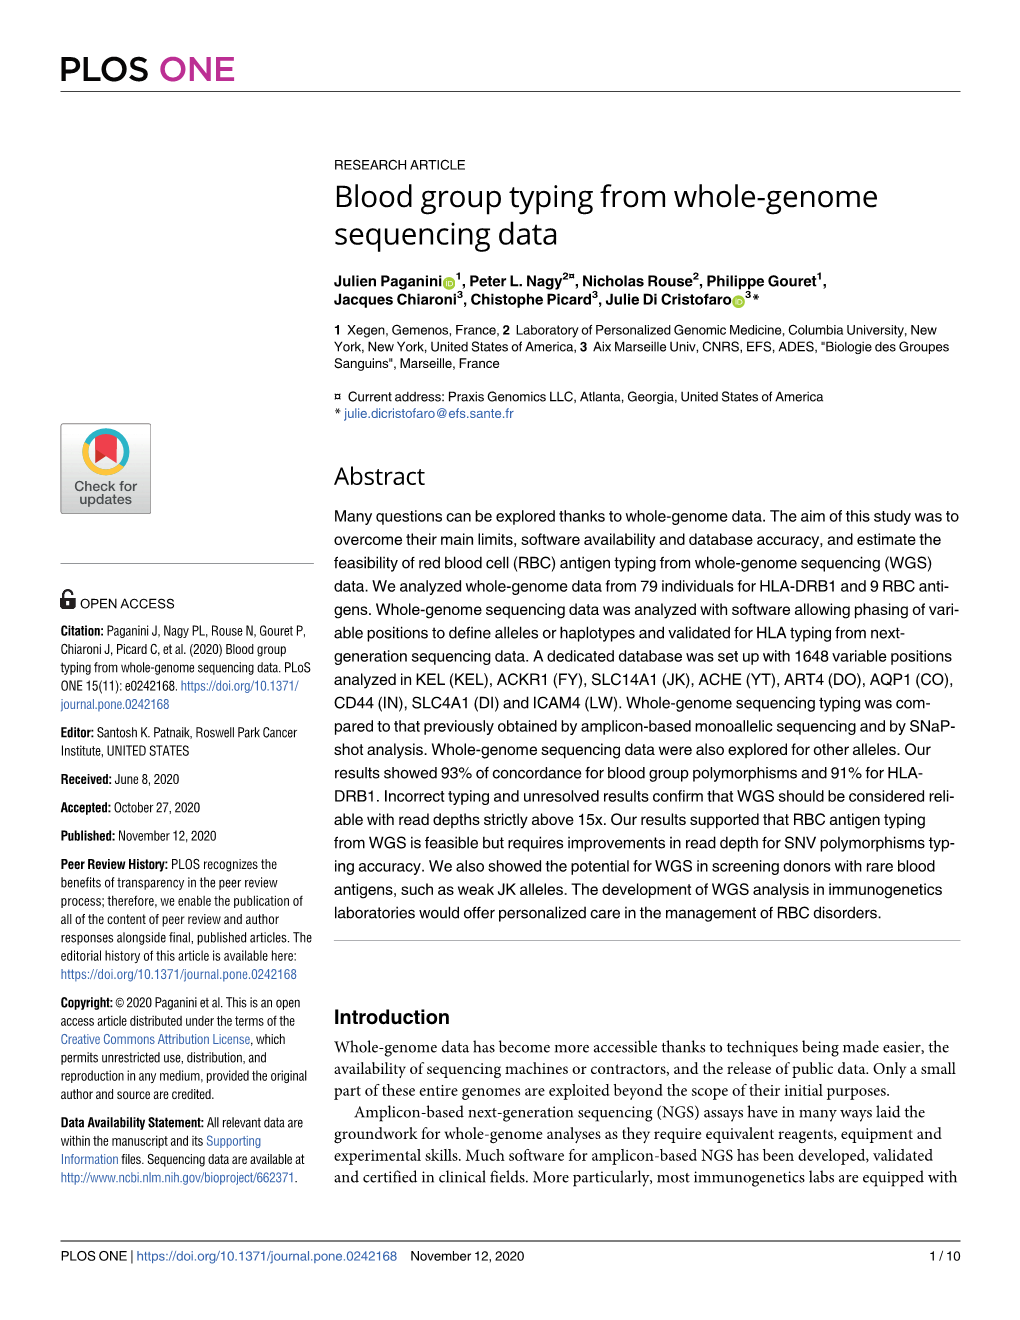 Oct 2020 Blood Group Typing from Whole-Genome Sequencing Data J Paganini, PL Nagy, N Rouse